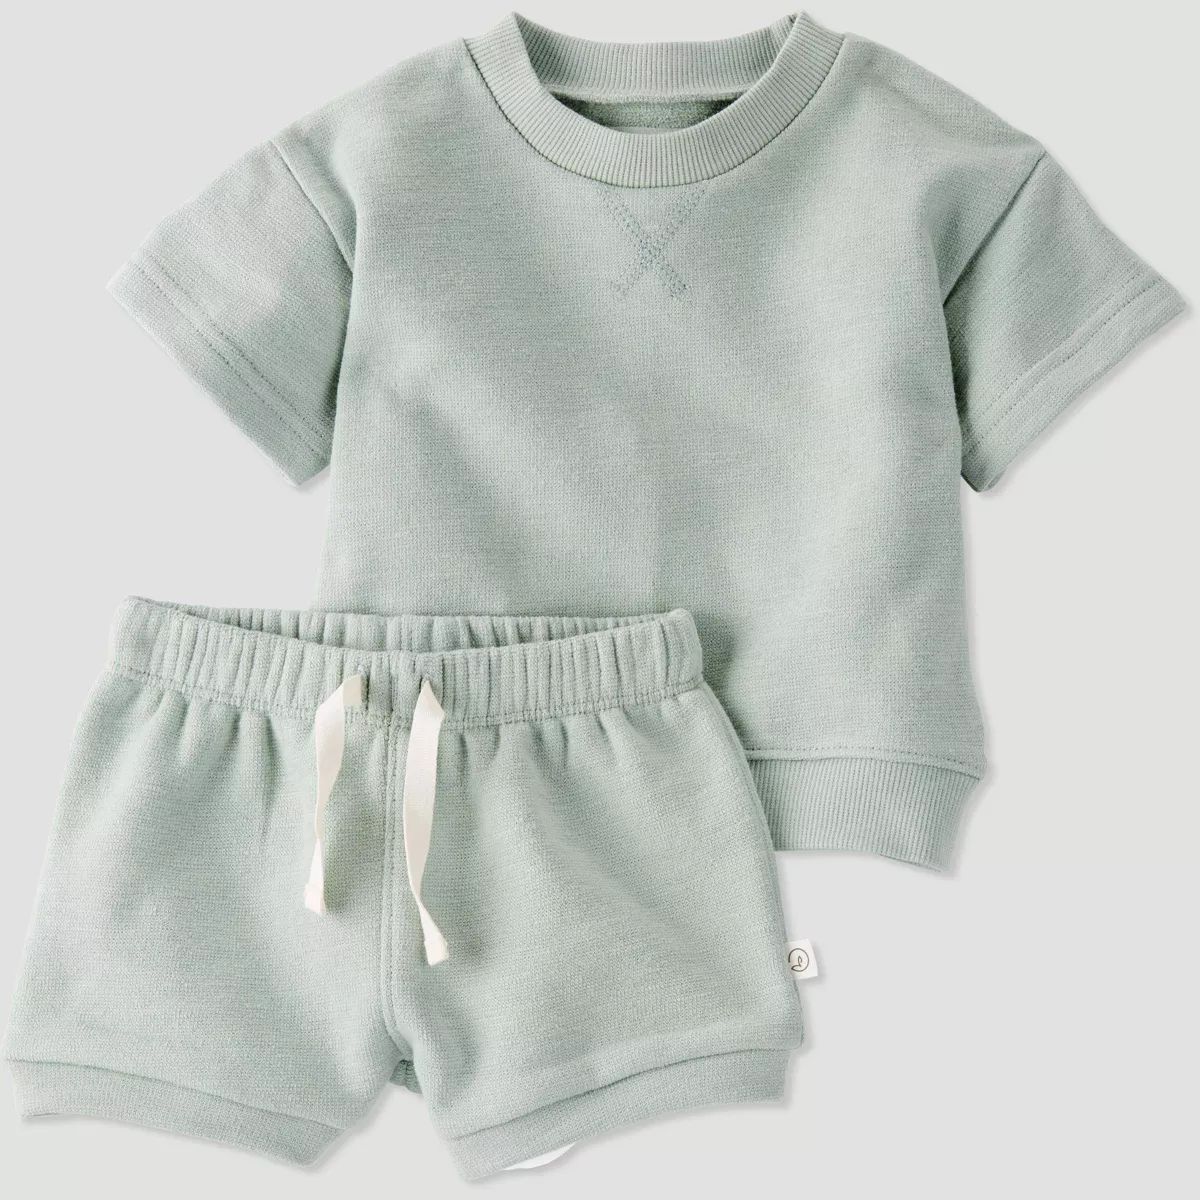 Little Planet by Carter’s Organic Baby 2pc Shorts Set - Green | Target